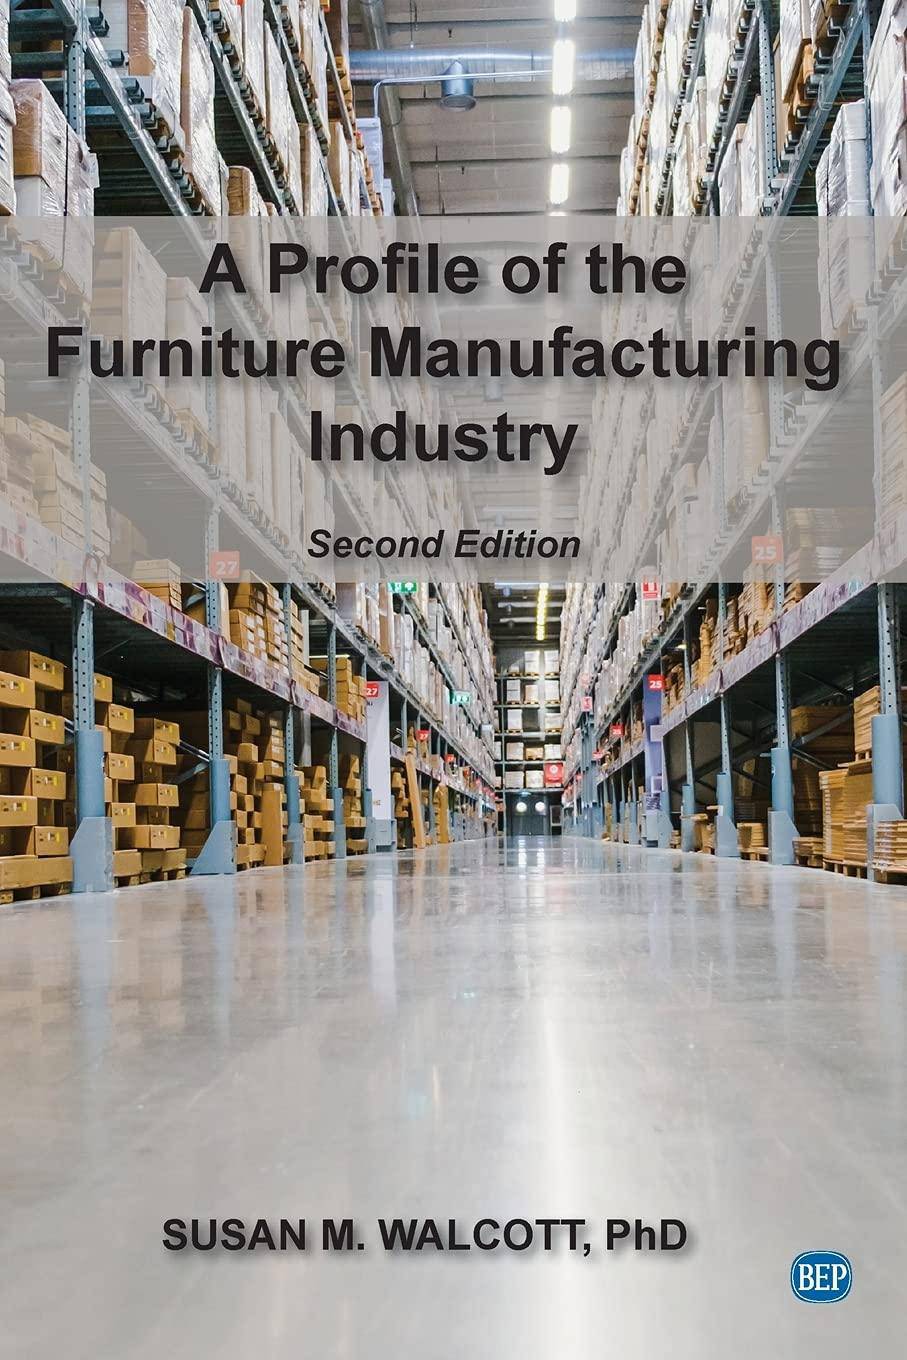 A Profile of the Furniture Manufacturing Industry - Second Edition - SureShot Books Publishing LLC